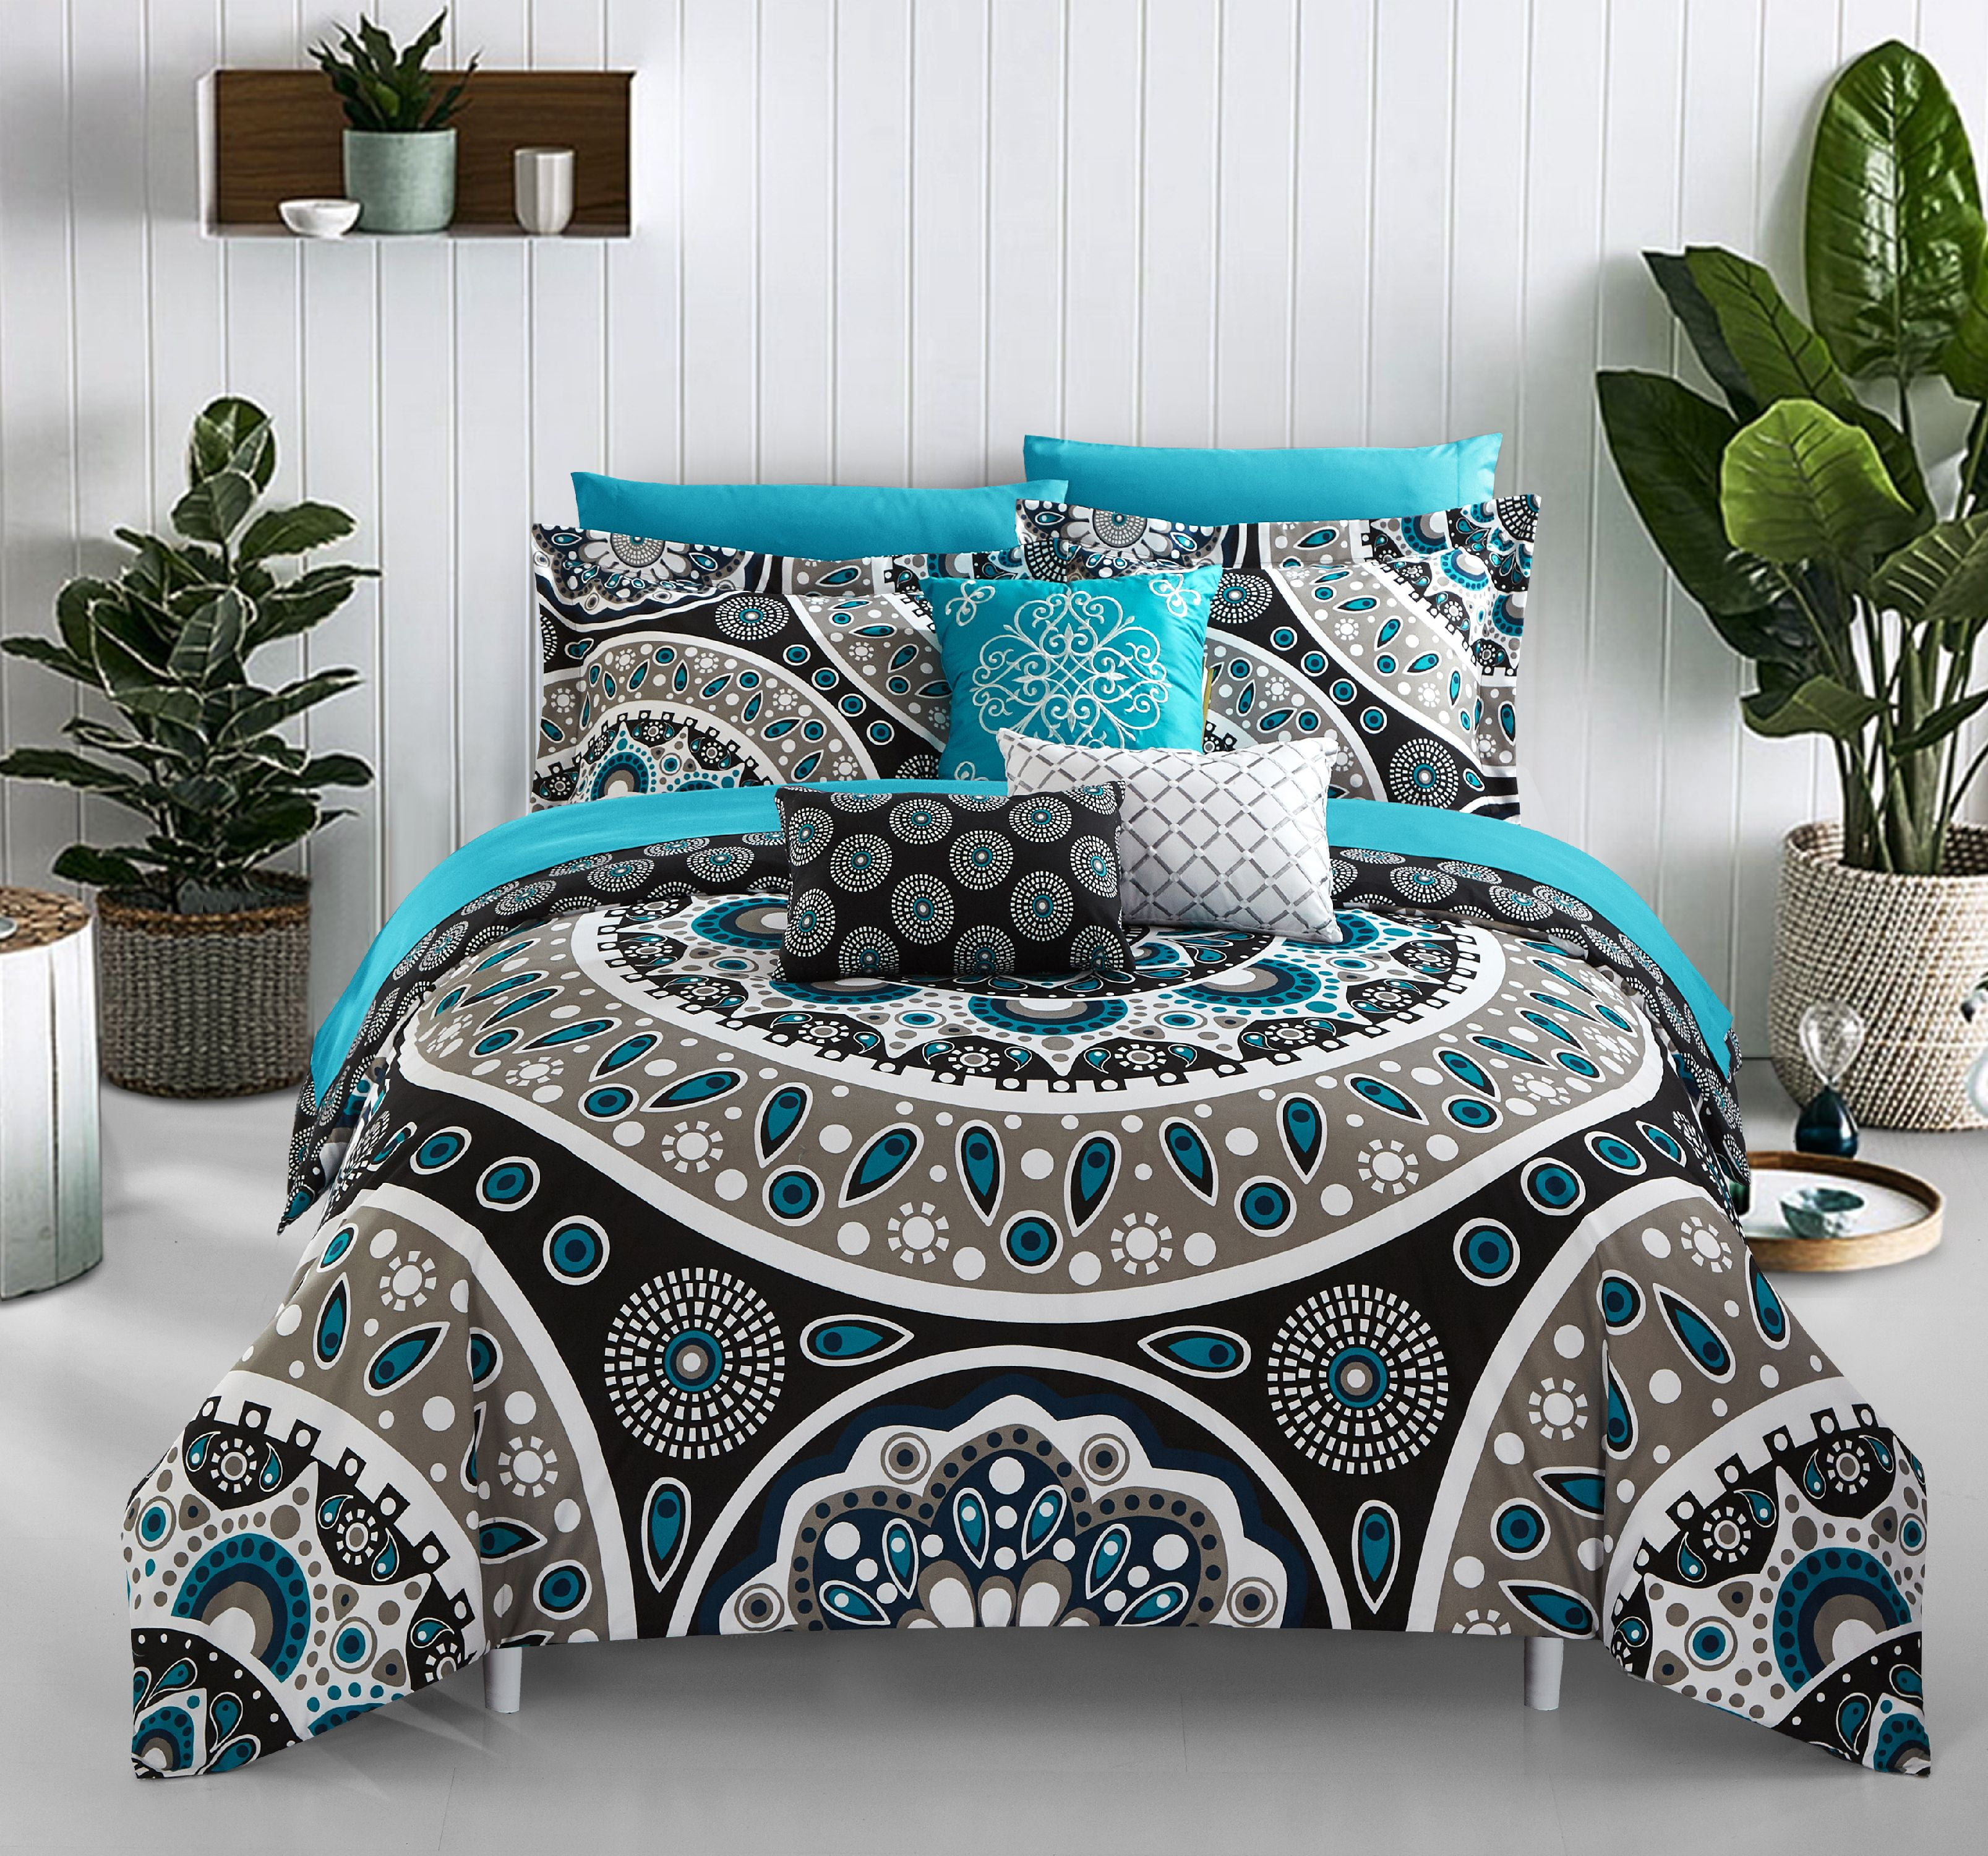 Blue King Chic Home Palmer 8 Piece Reversible Comforter Large Scale Boho Inspired Medallion Paisley Print Design Bed in a Bag-Sheet Set Pillowcases Decorative Pillow Shams Included